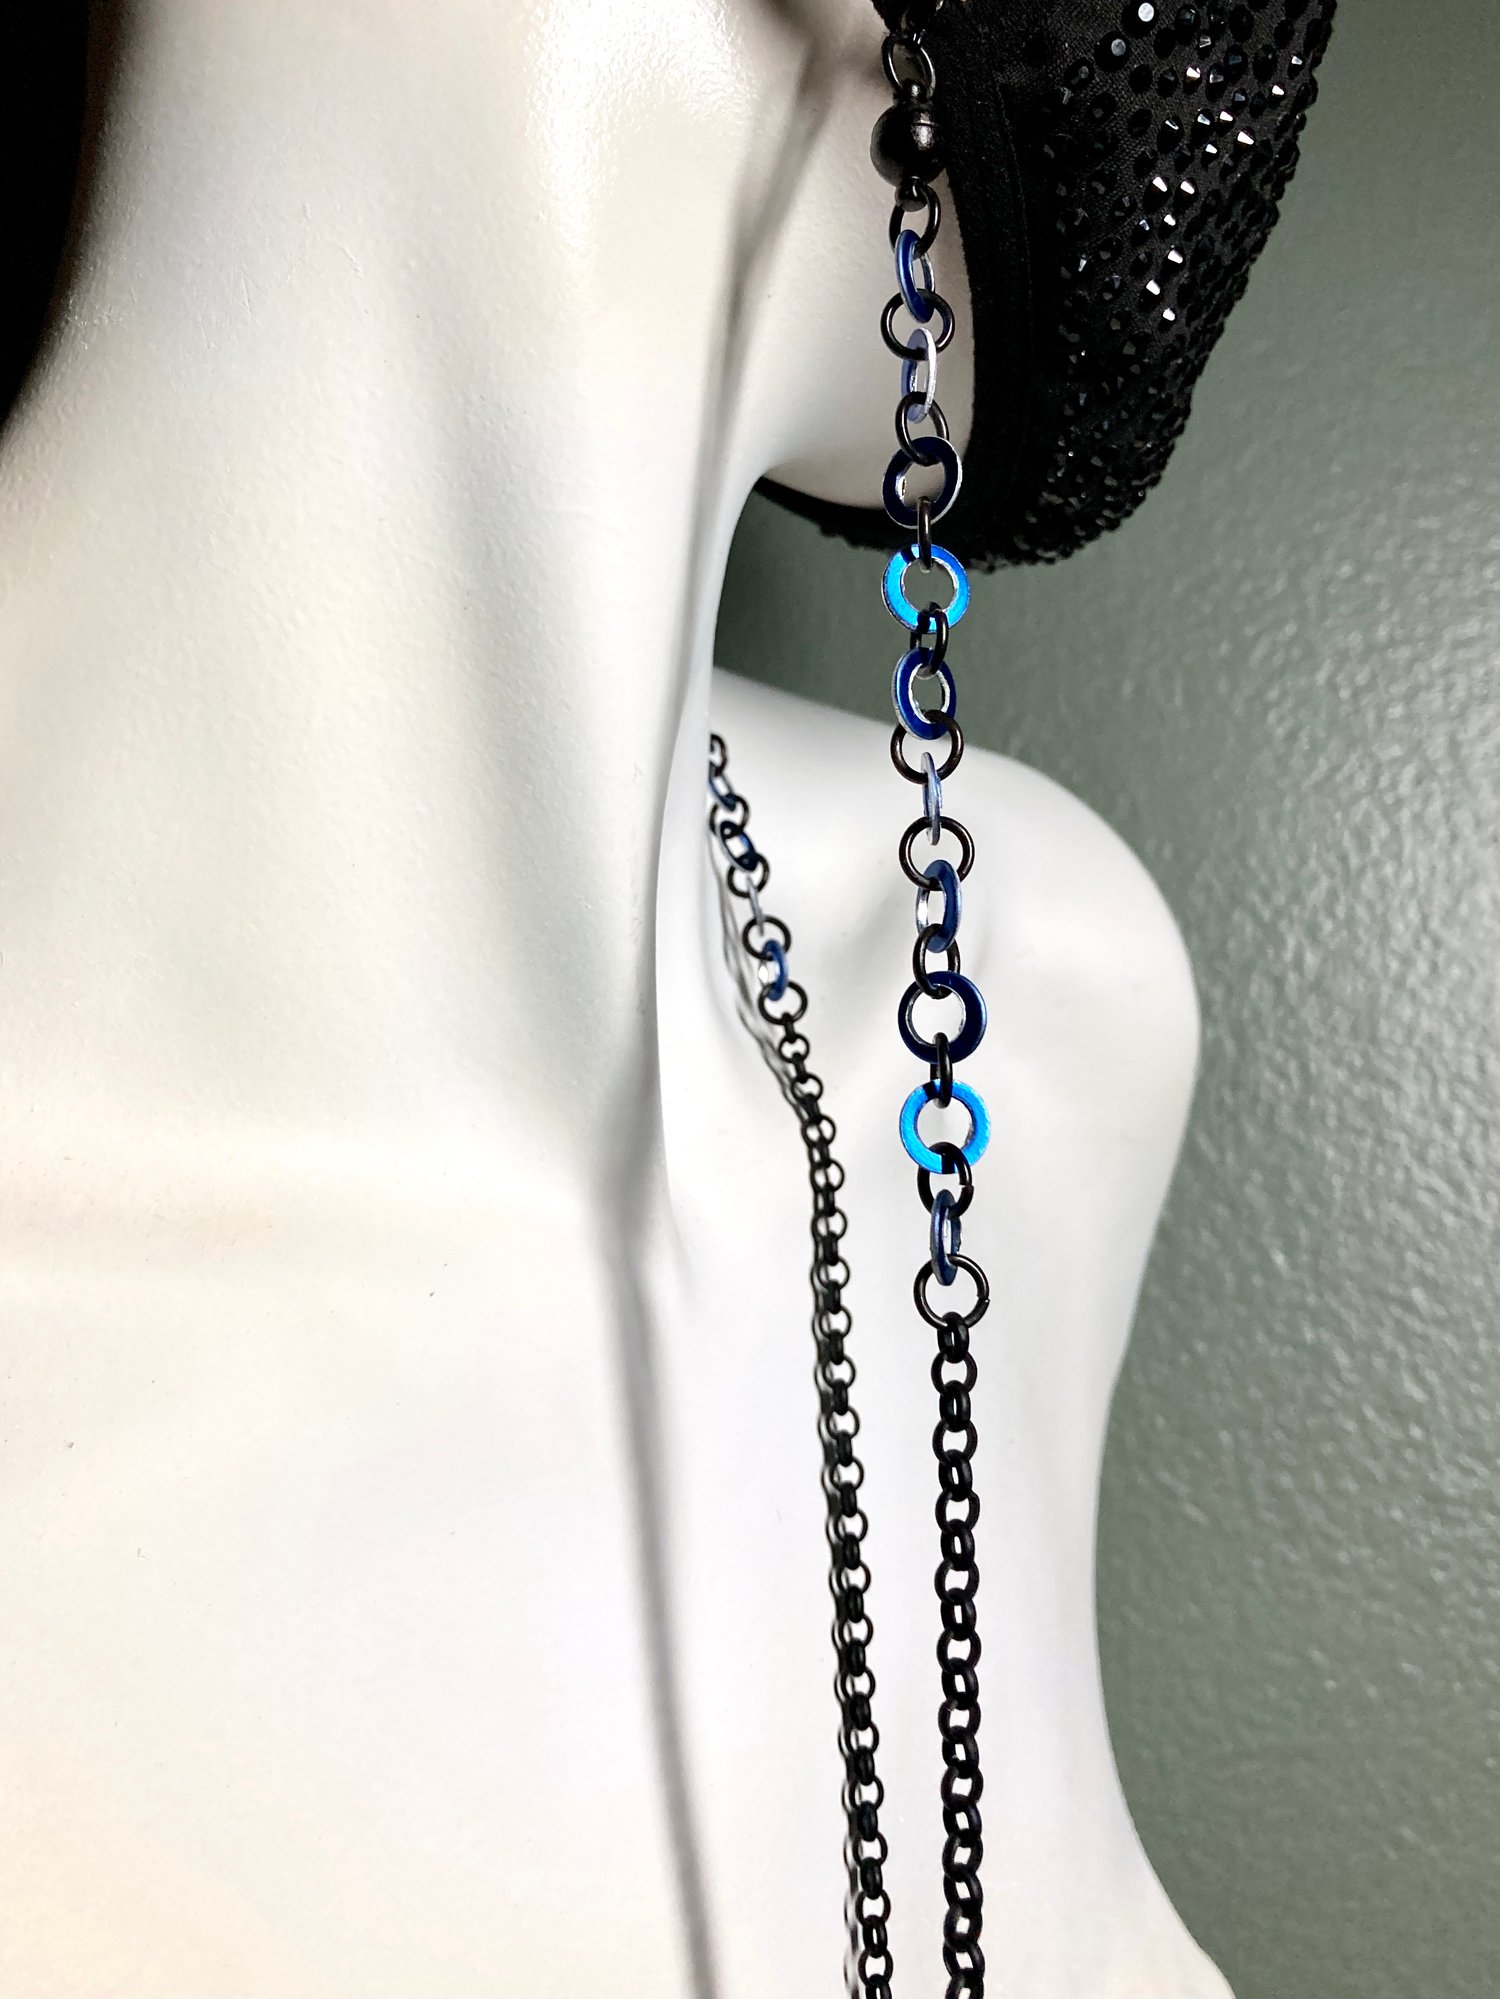 Image of 22" Matte Black & Blue Convertible Necklace/Eyeglass Chain with Matte Black Ball Magnet Clasp